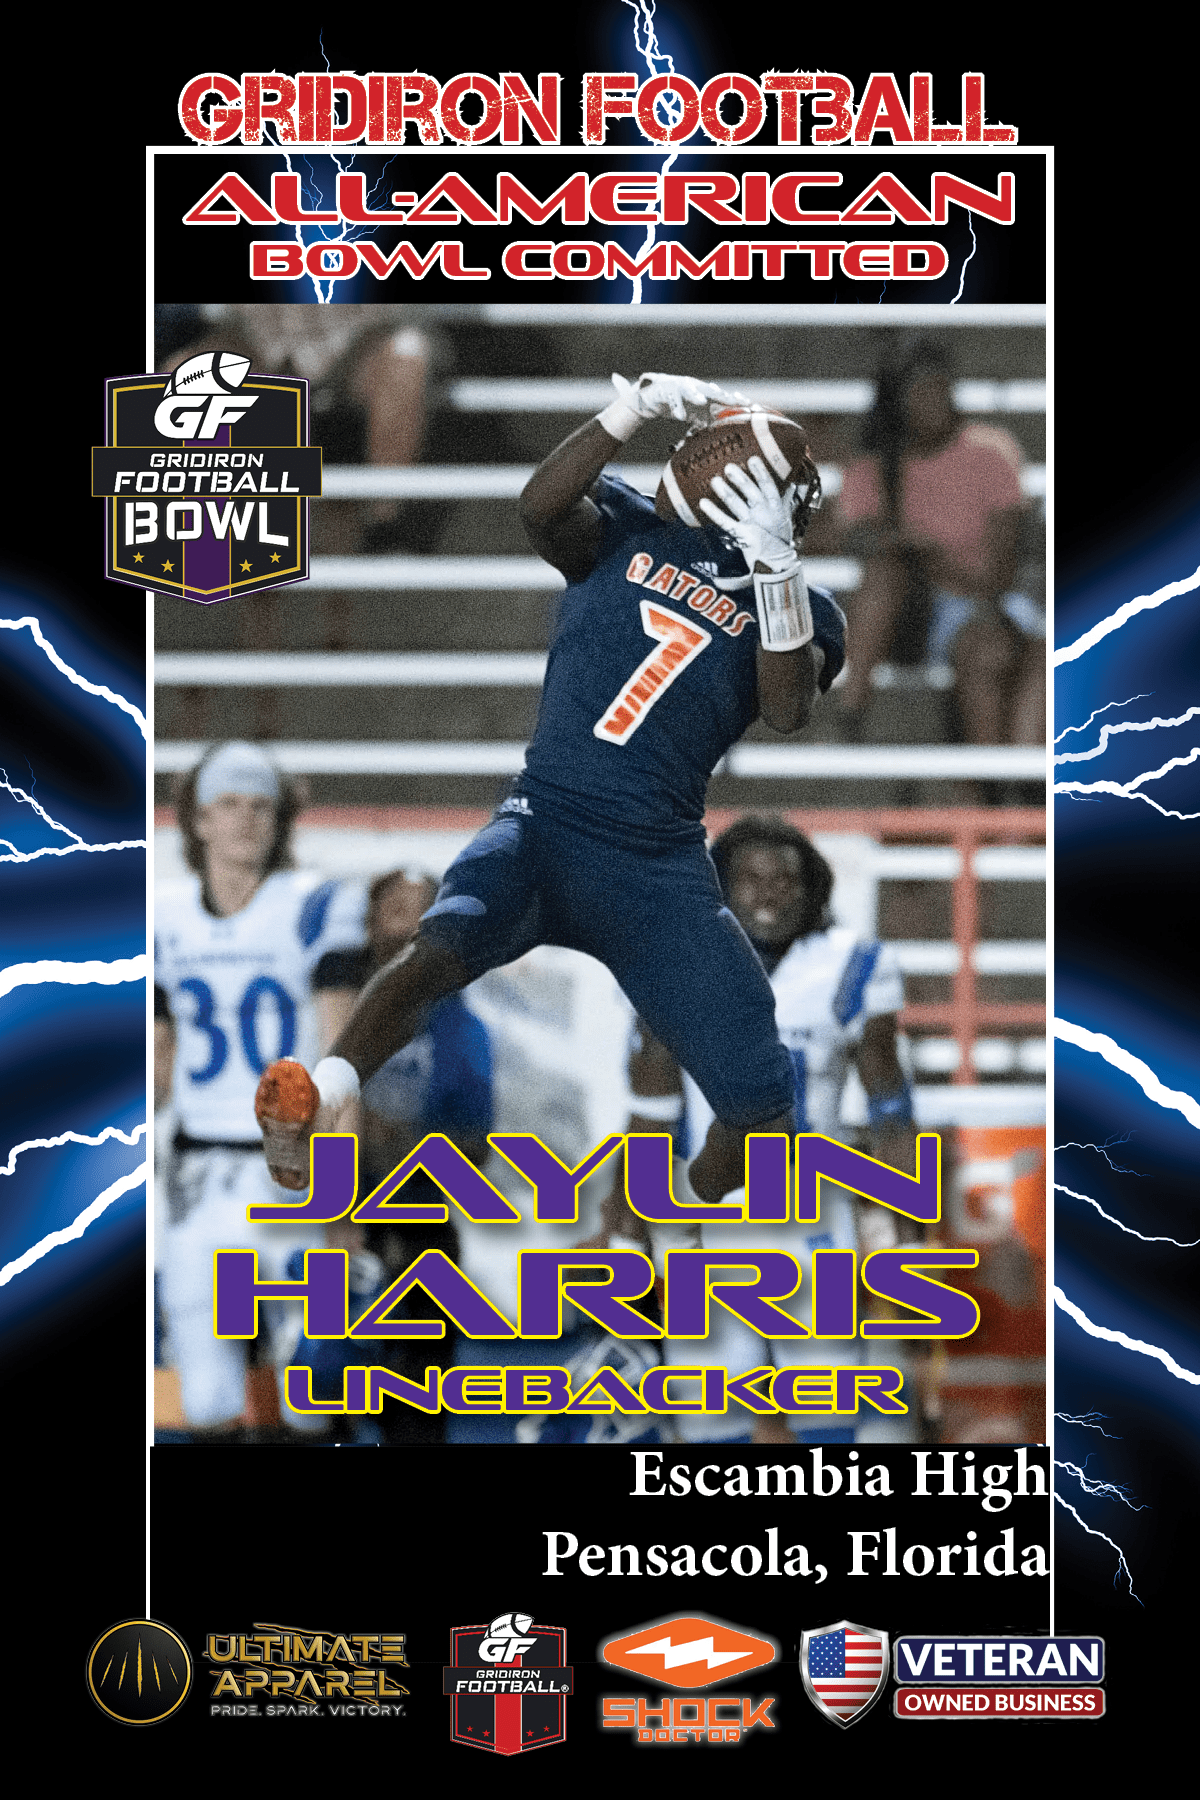 BREAKING NEWS: Escambia High School (Pensacola, FL) LB Jaylin Harris Commits To The Gridiron Football All-American Bowl Game